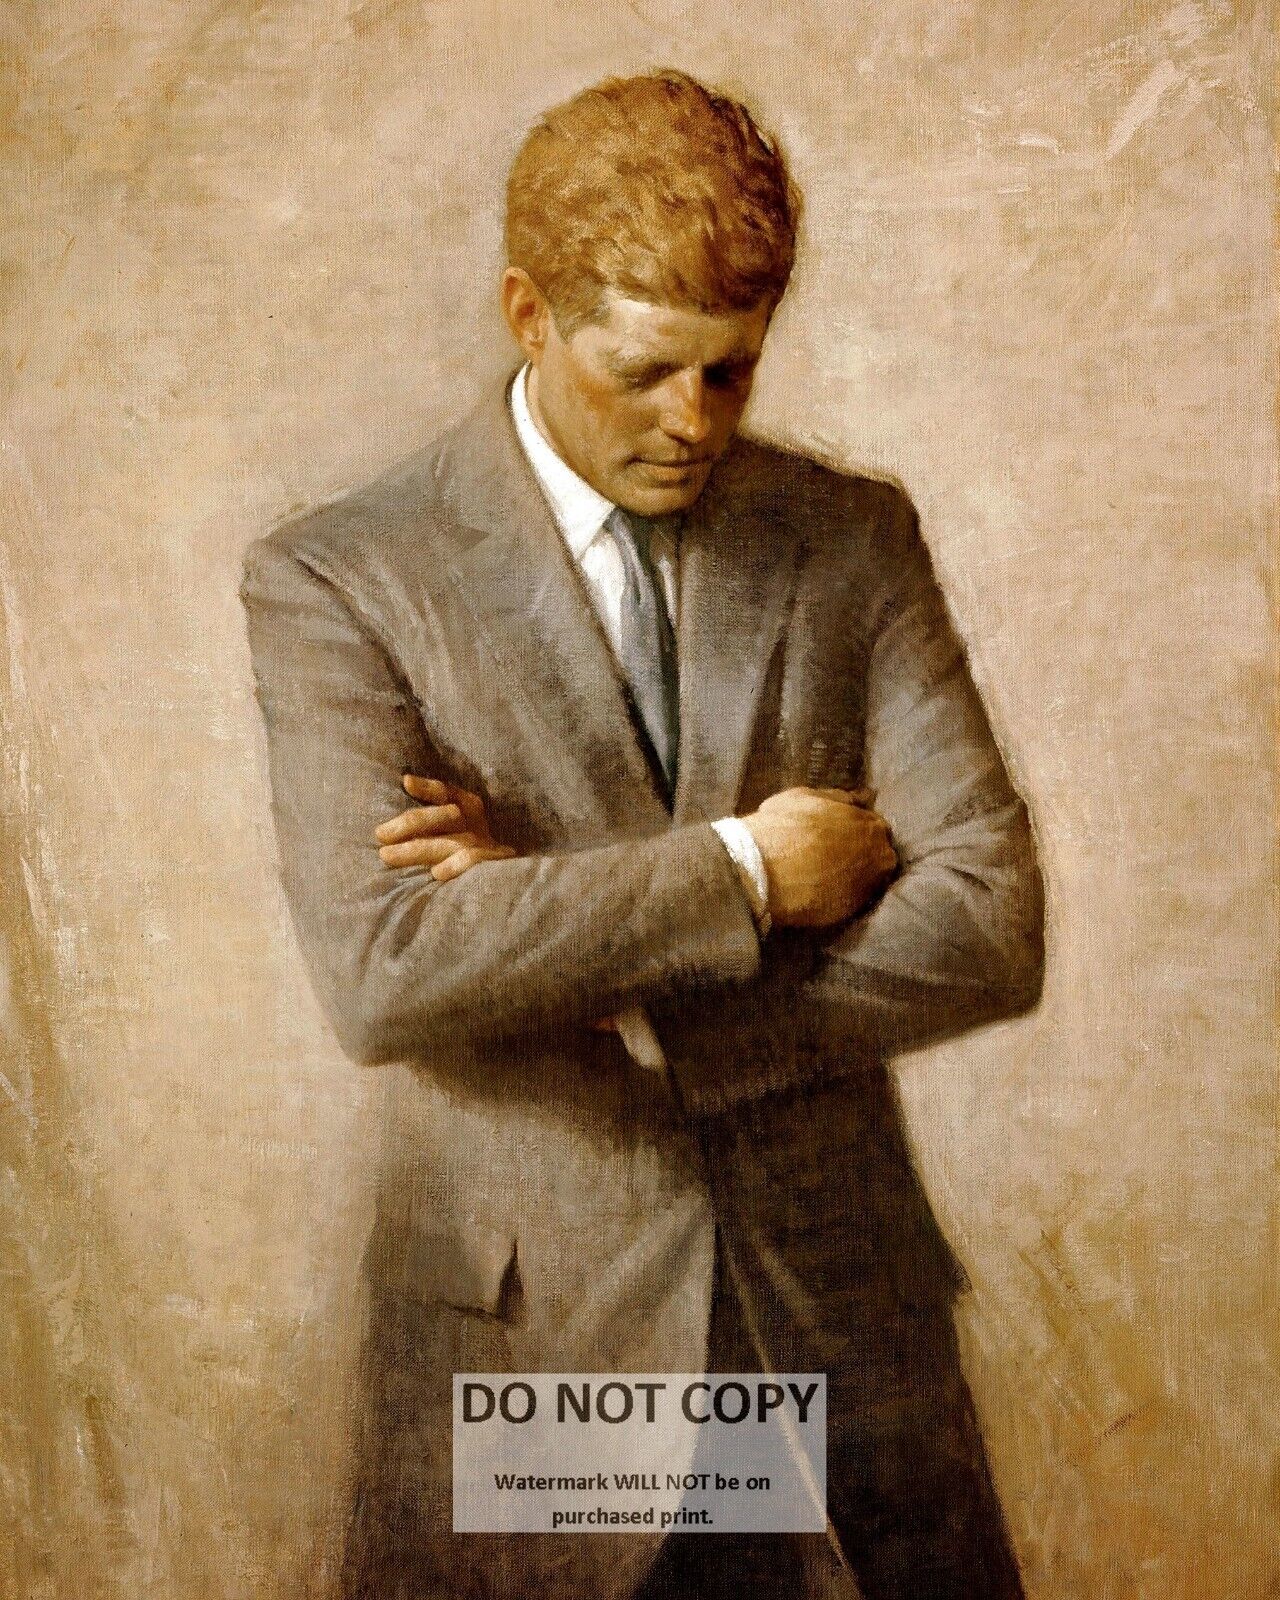 PRESIDENT JOHN F. KENNEDY REPRINT OF OFFICIAL PAINTING - 8X10 PHOTO (MW445)